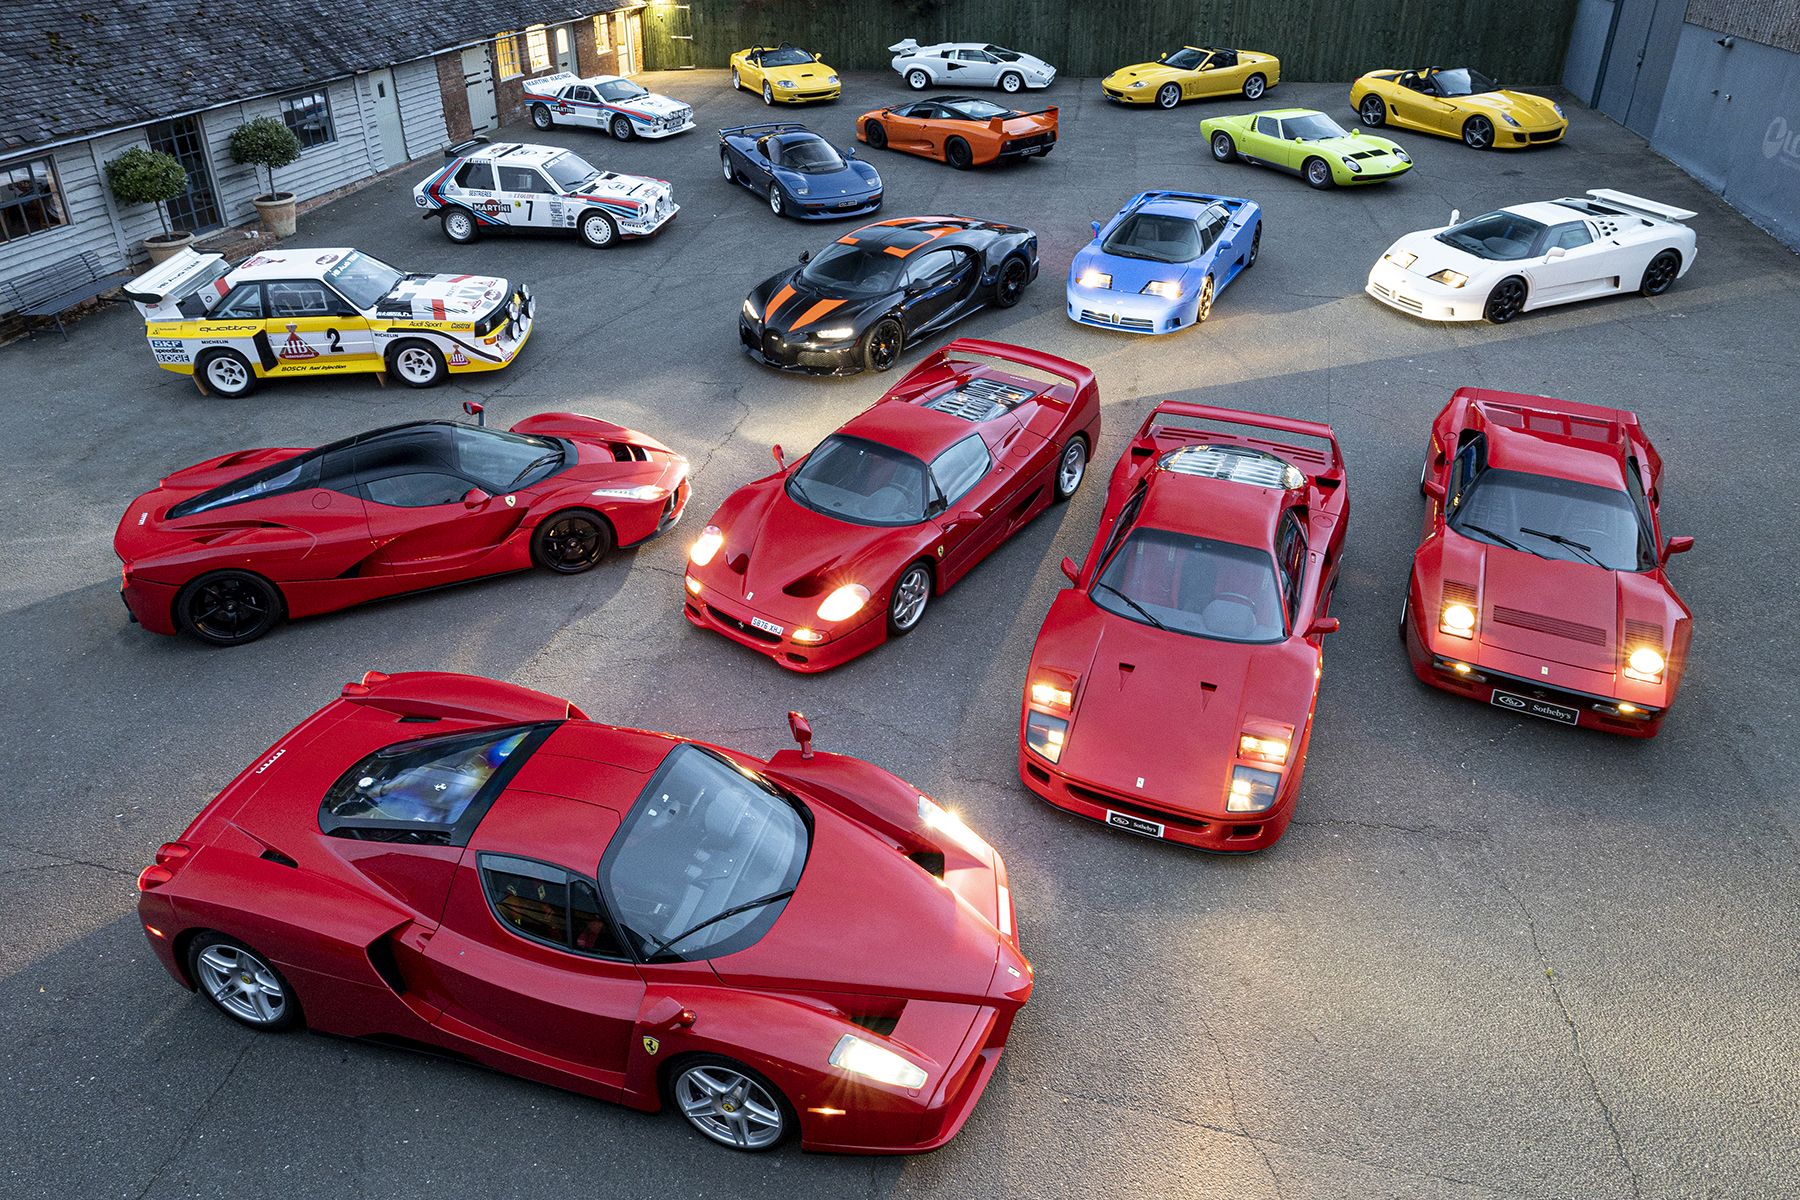 Enviable collection of 18 vintage supercars set for auction